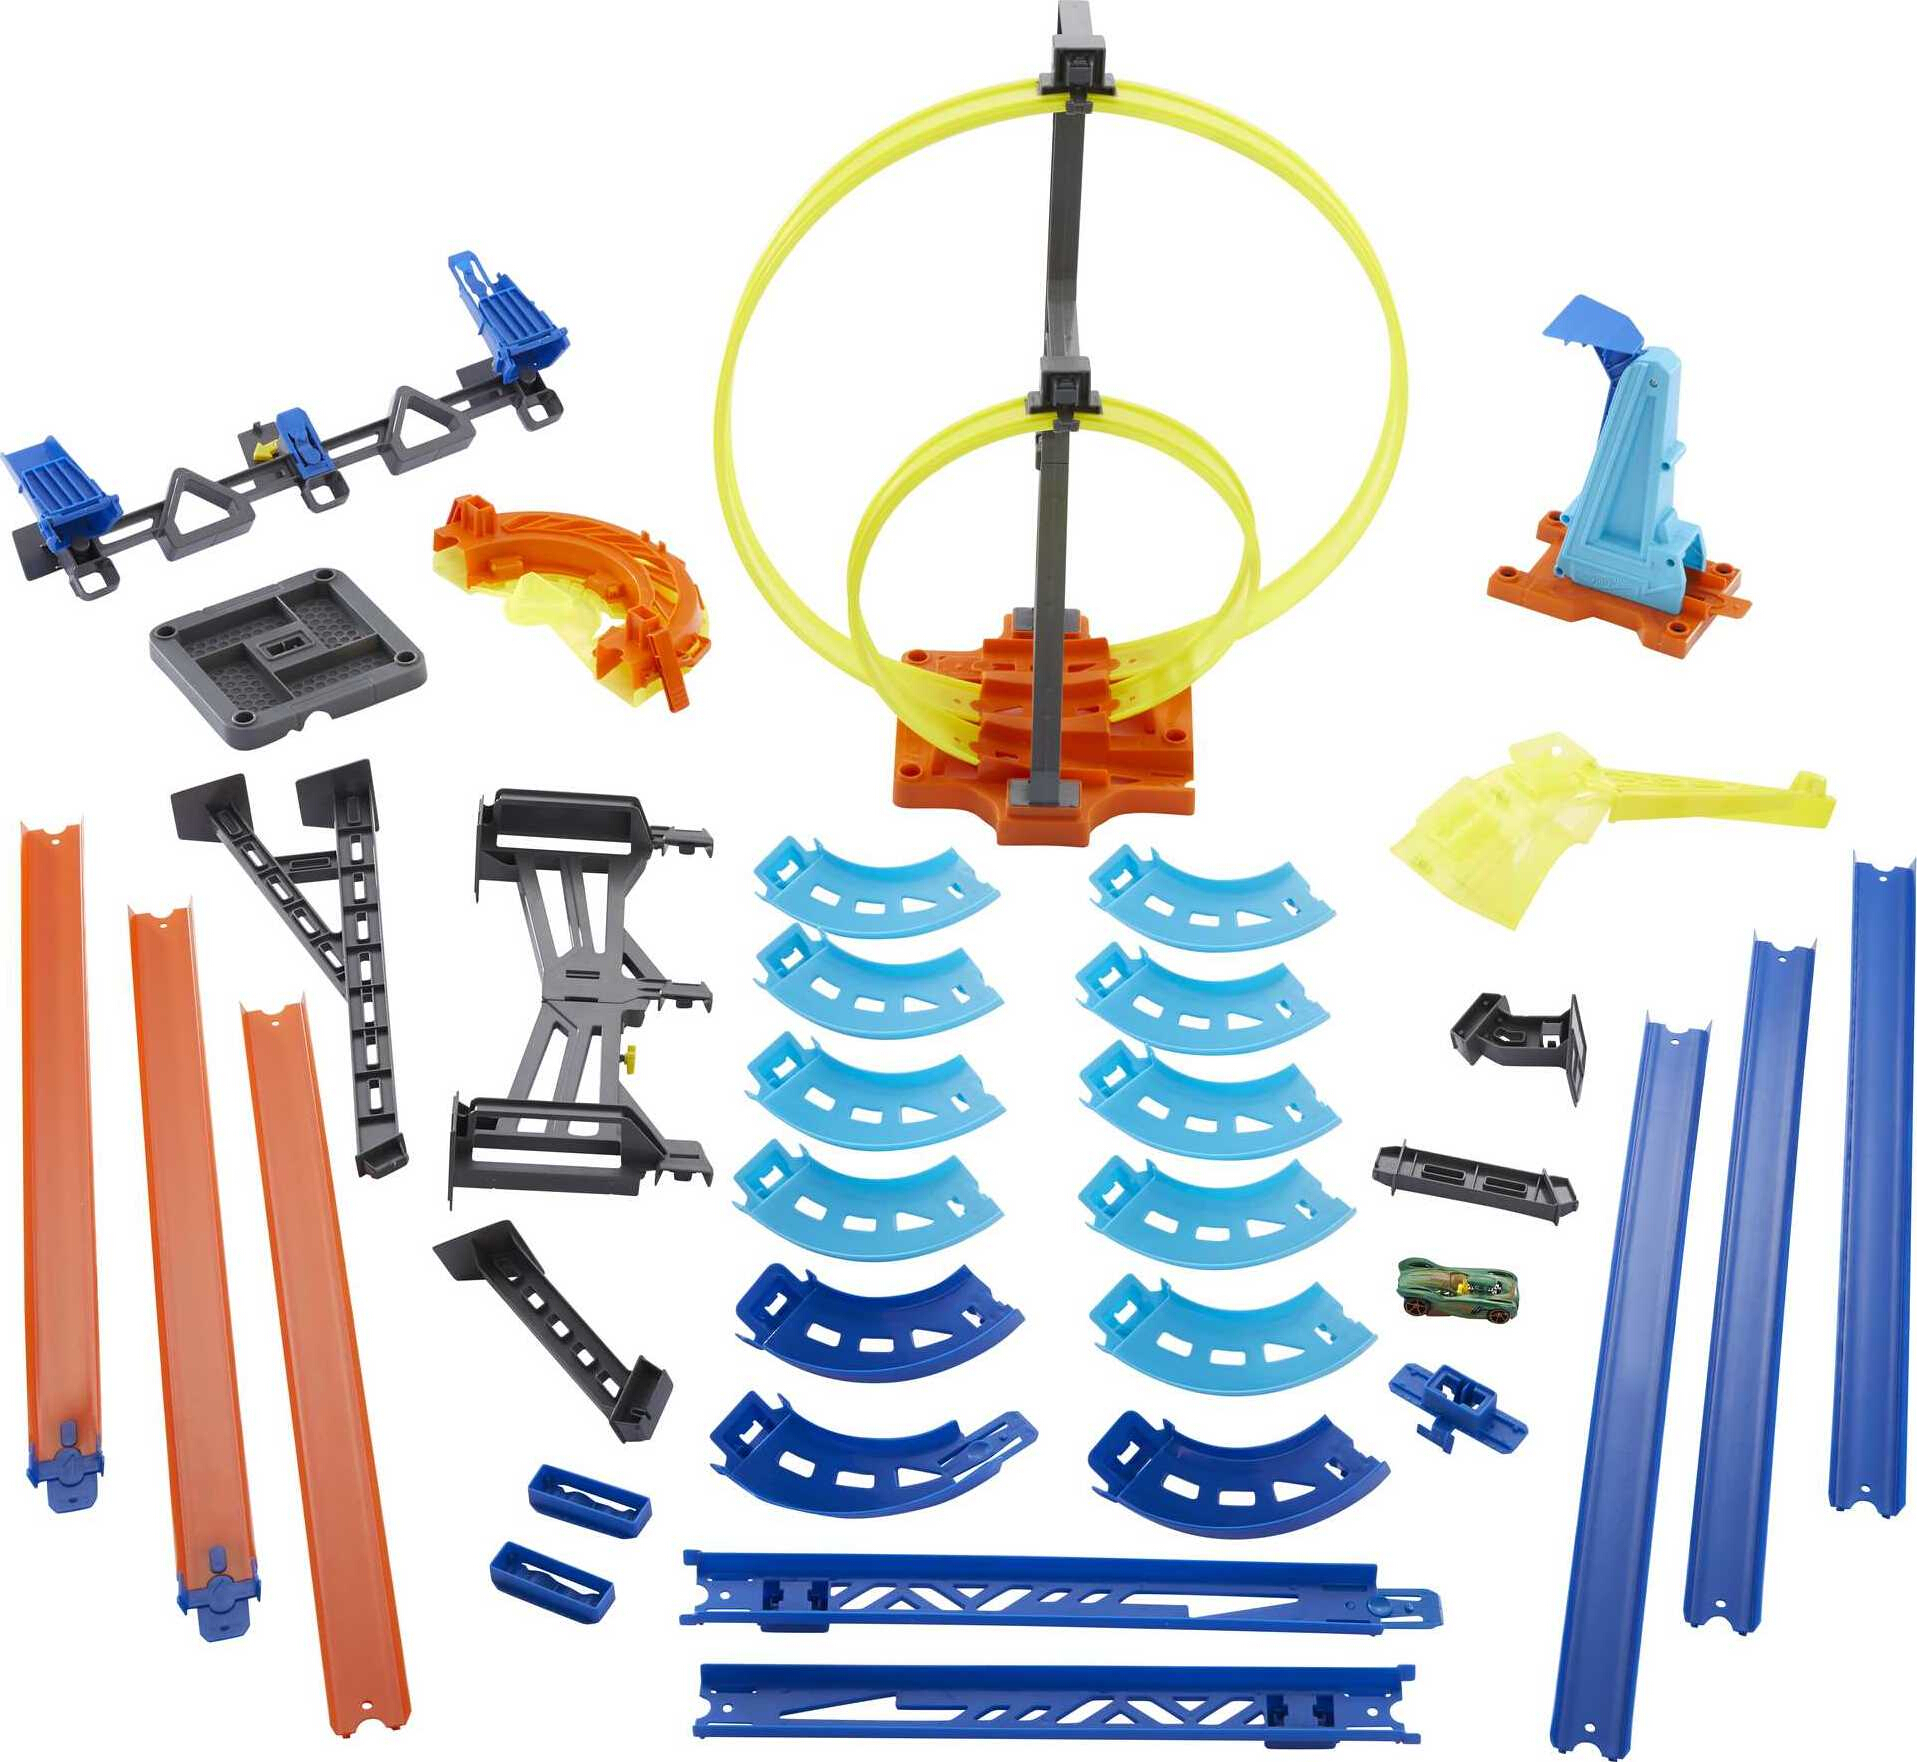 Hot Wheels Track Builder Vertical Launch Kit, 50-in Tall, 3 Configurations & 1 Toy Car - image 5 of 6